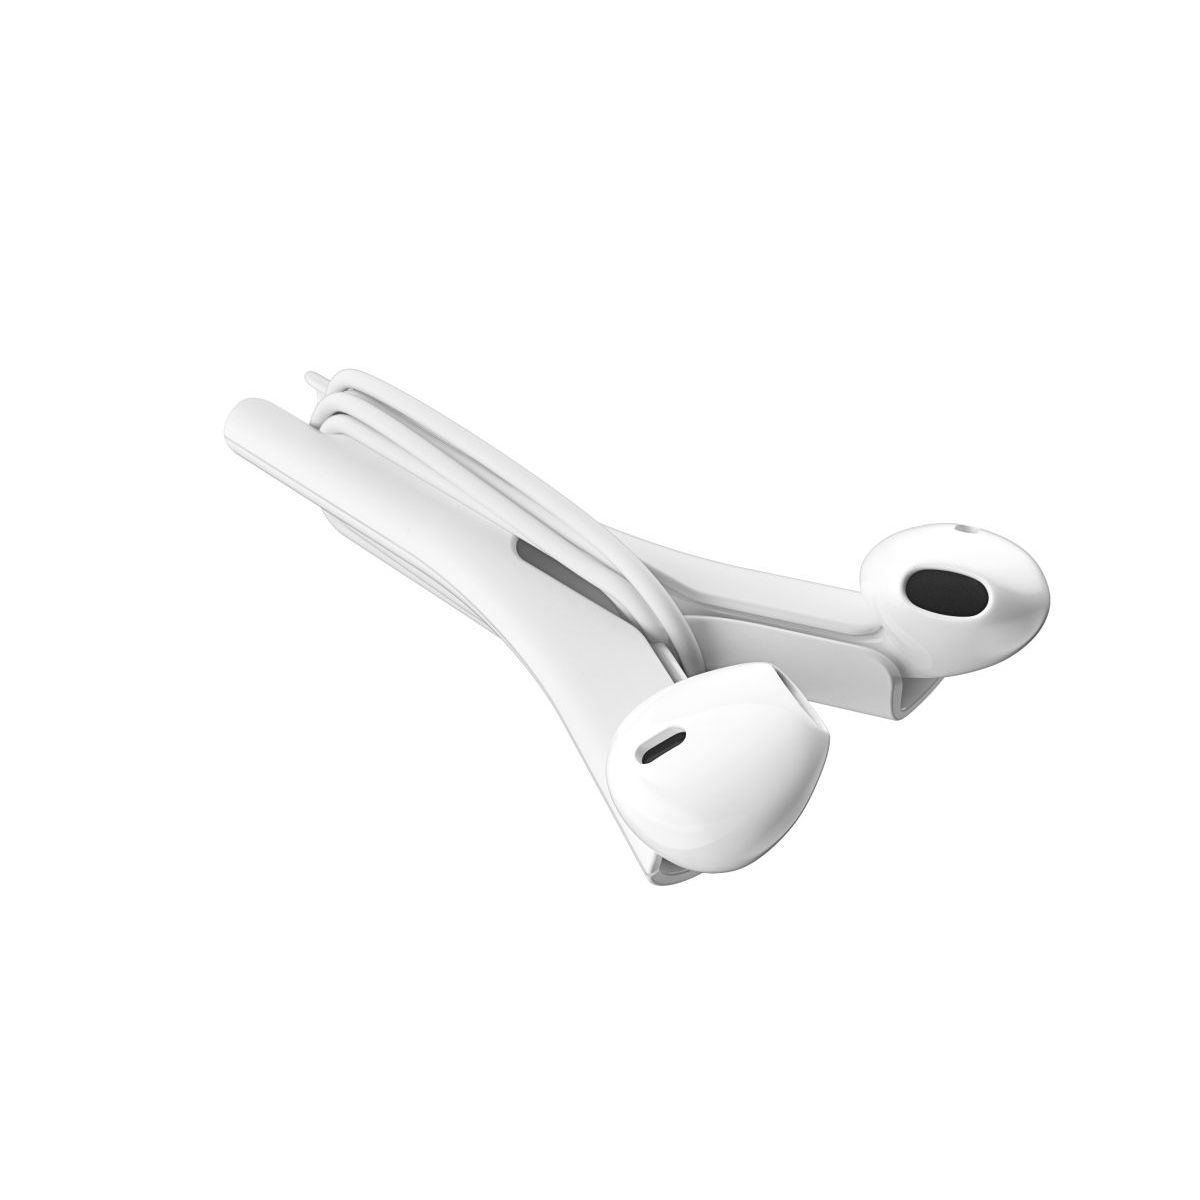 TWIG headphone cord anti tangler for iPhone and Samsung - White